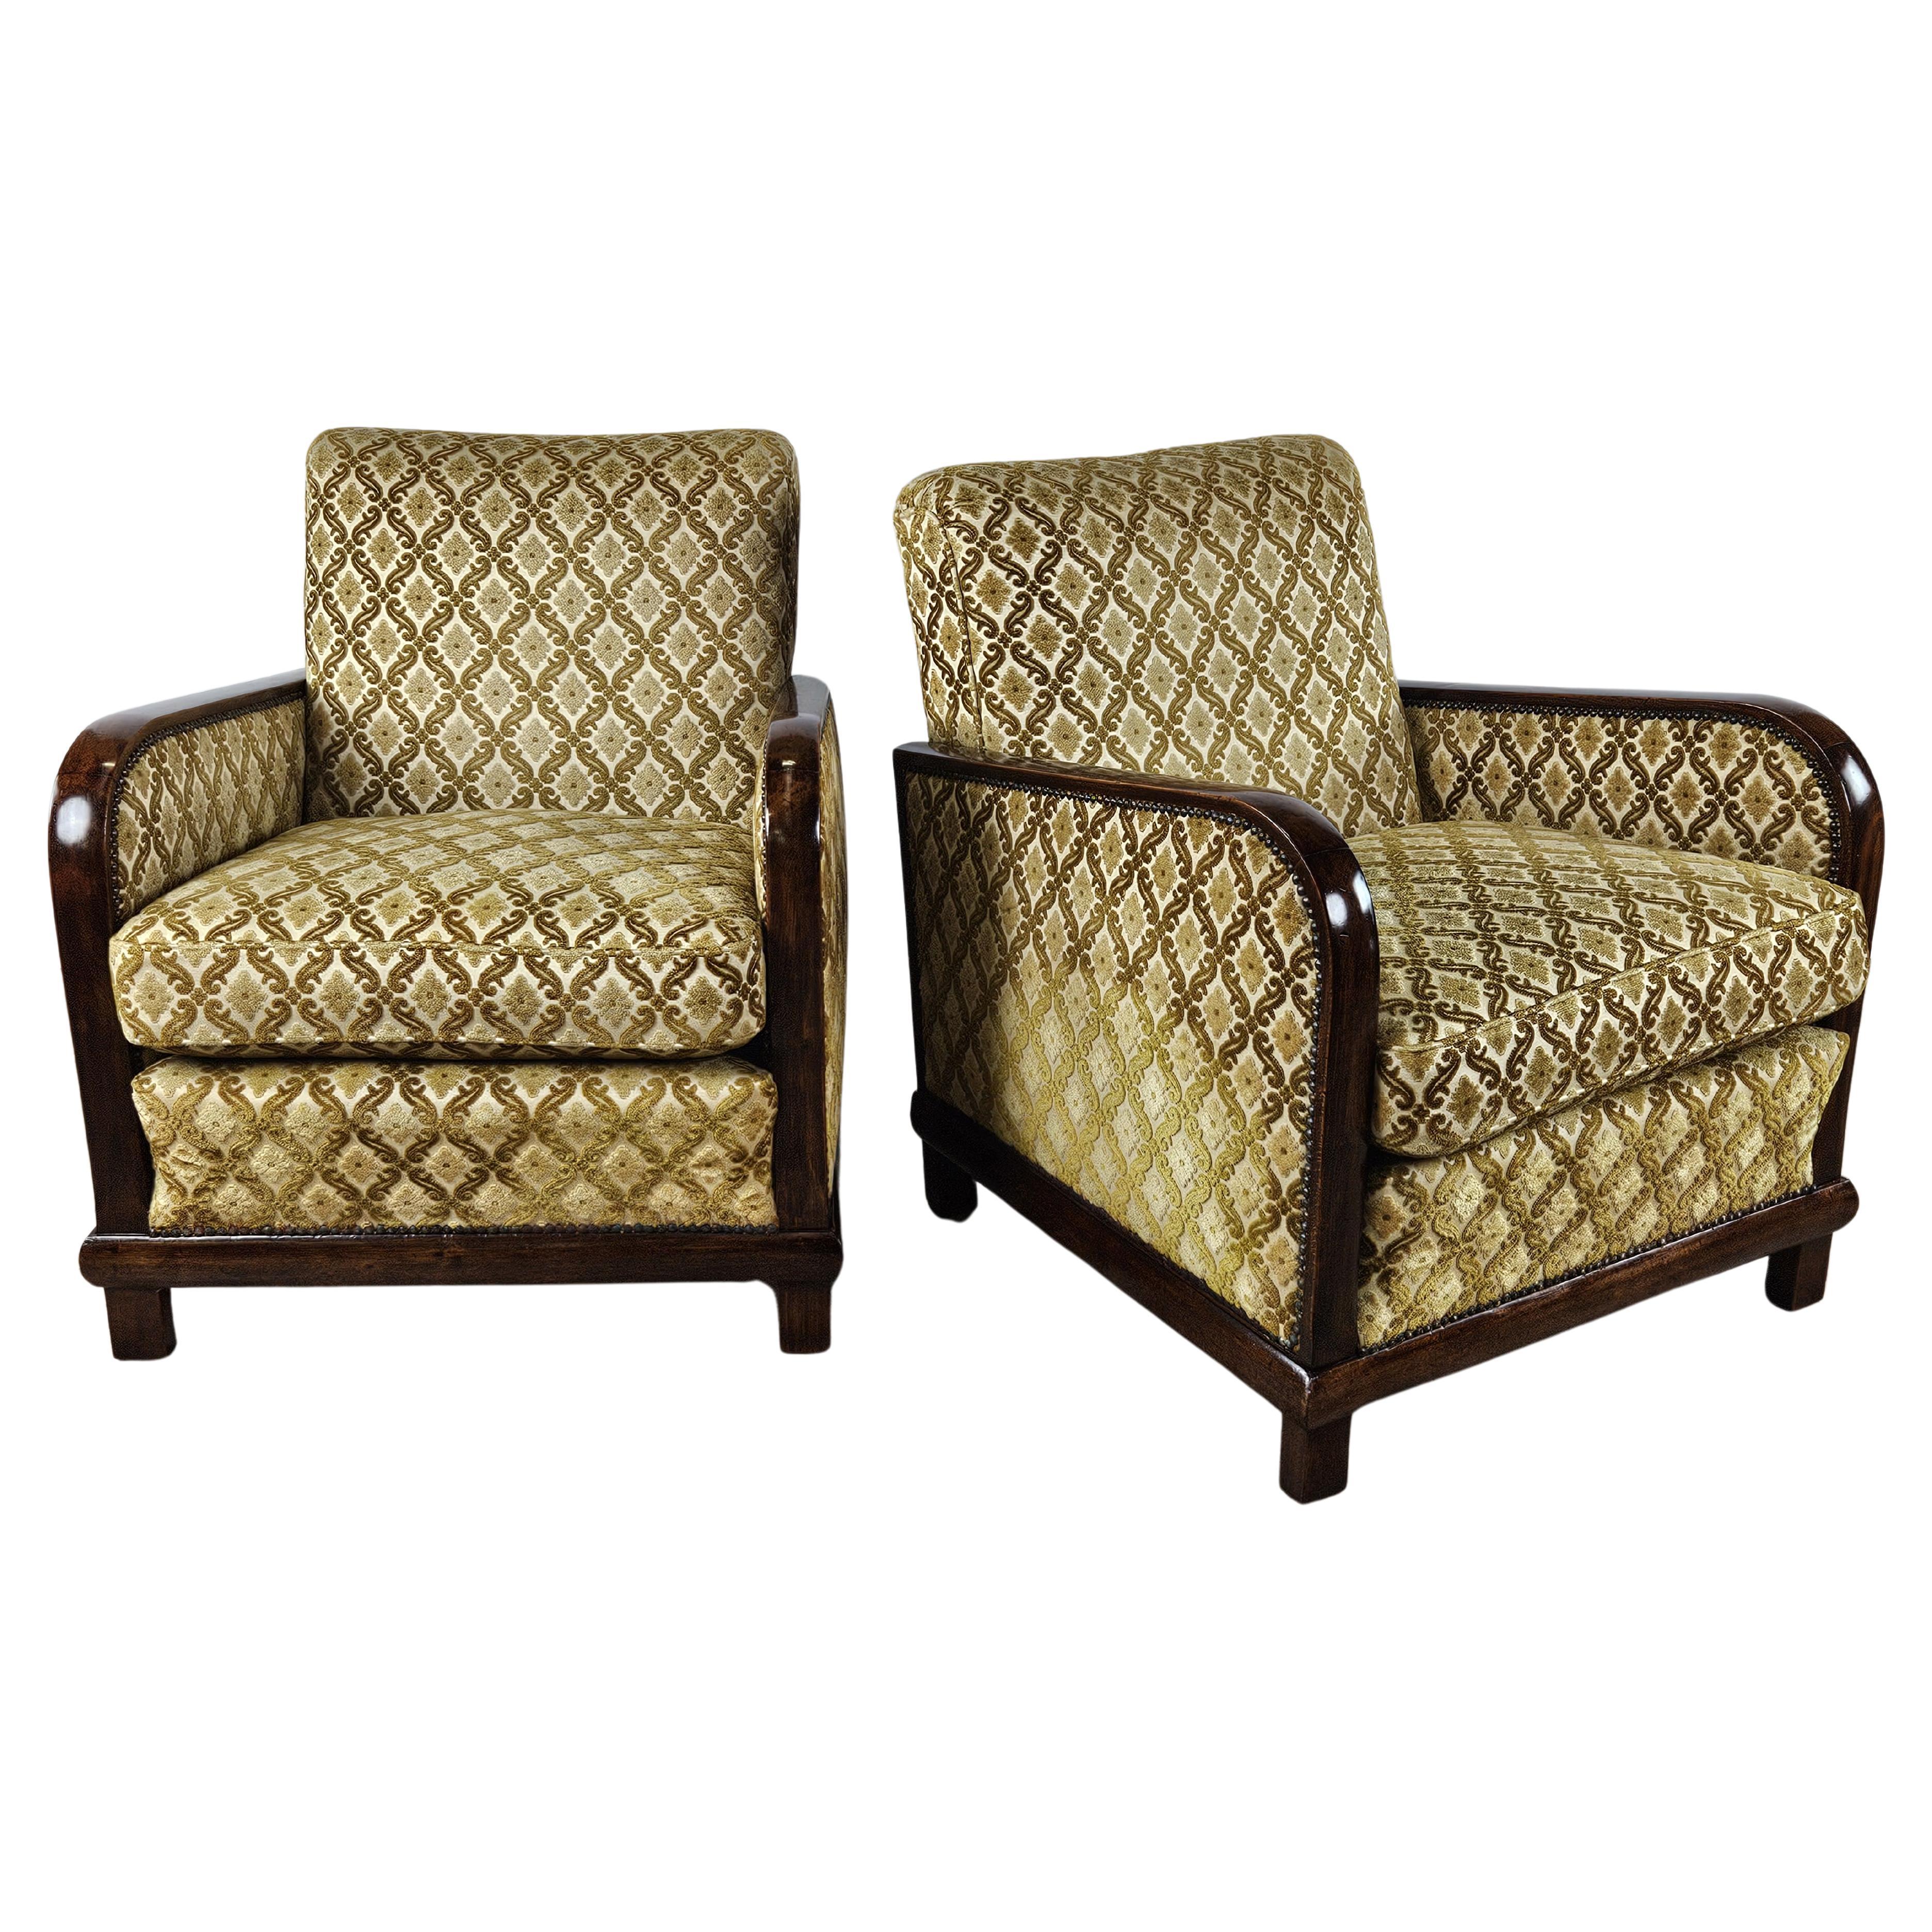 Pair of 1930s Art Deco armchairs upholstered in floral fabric